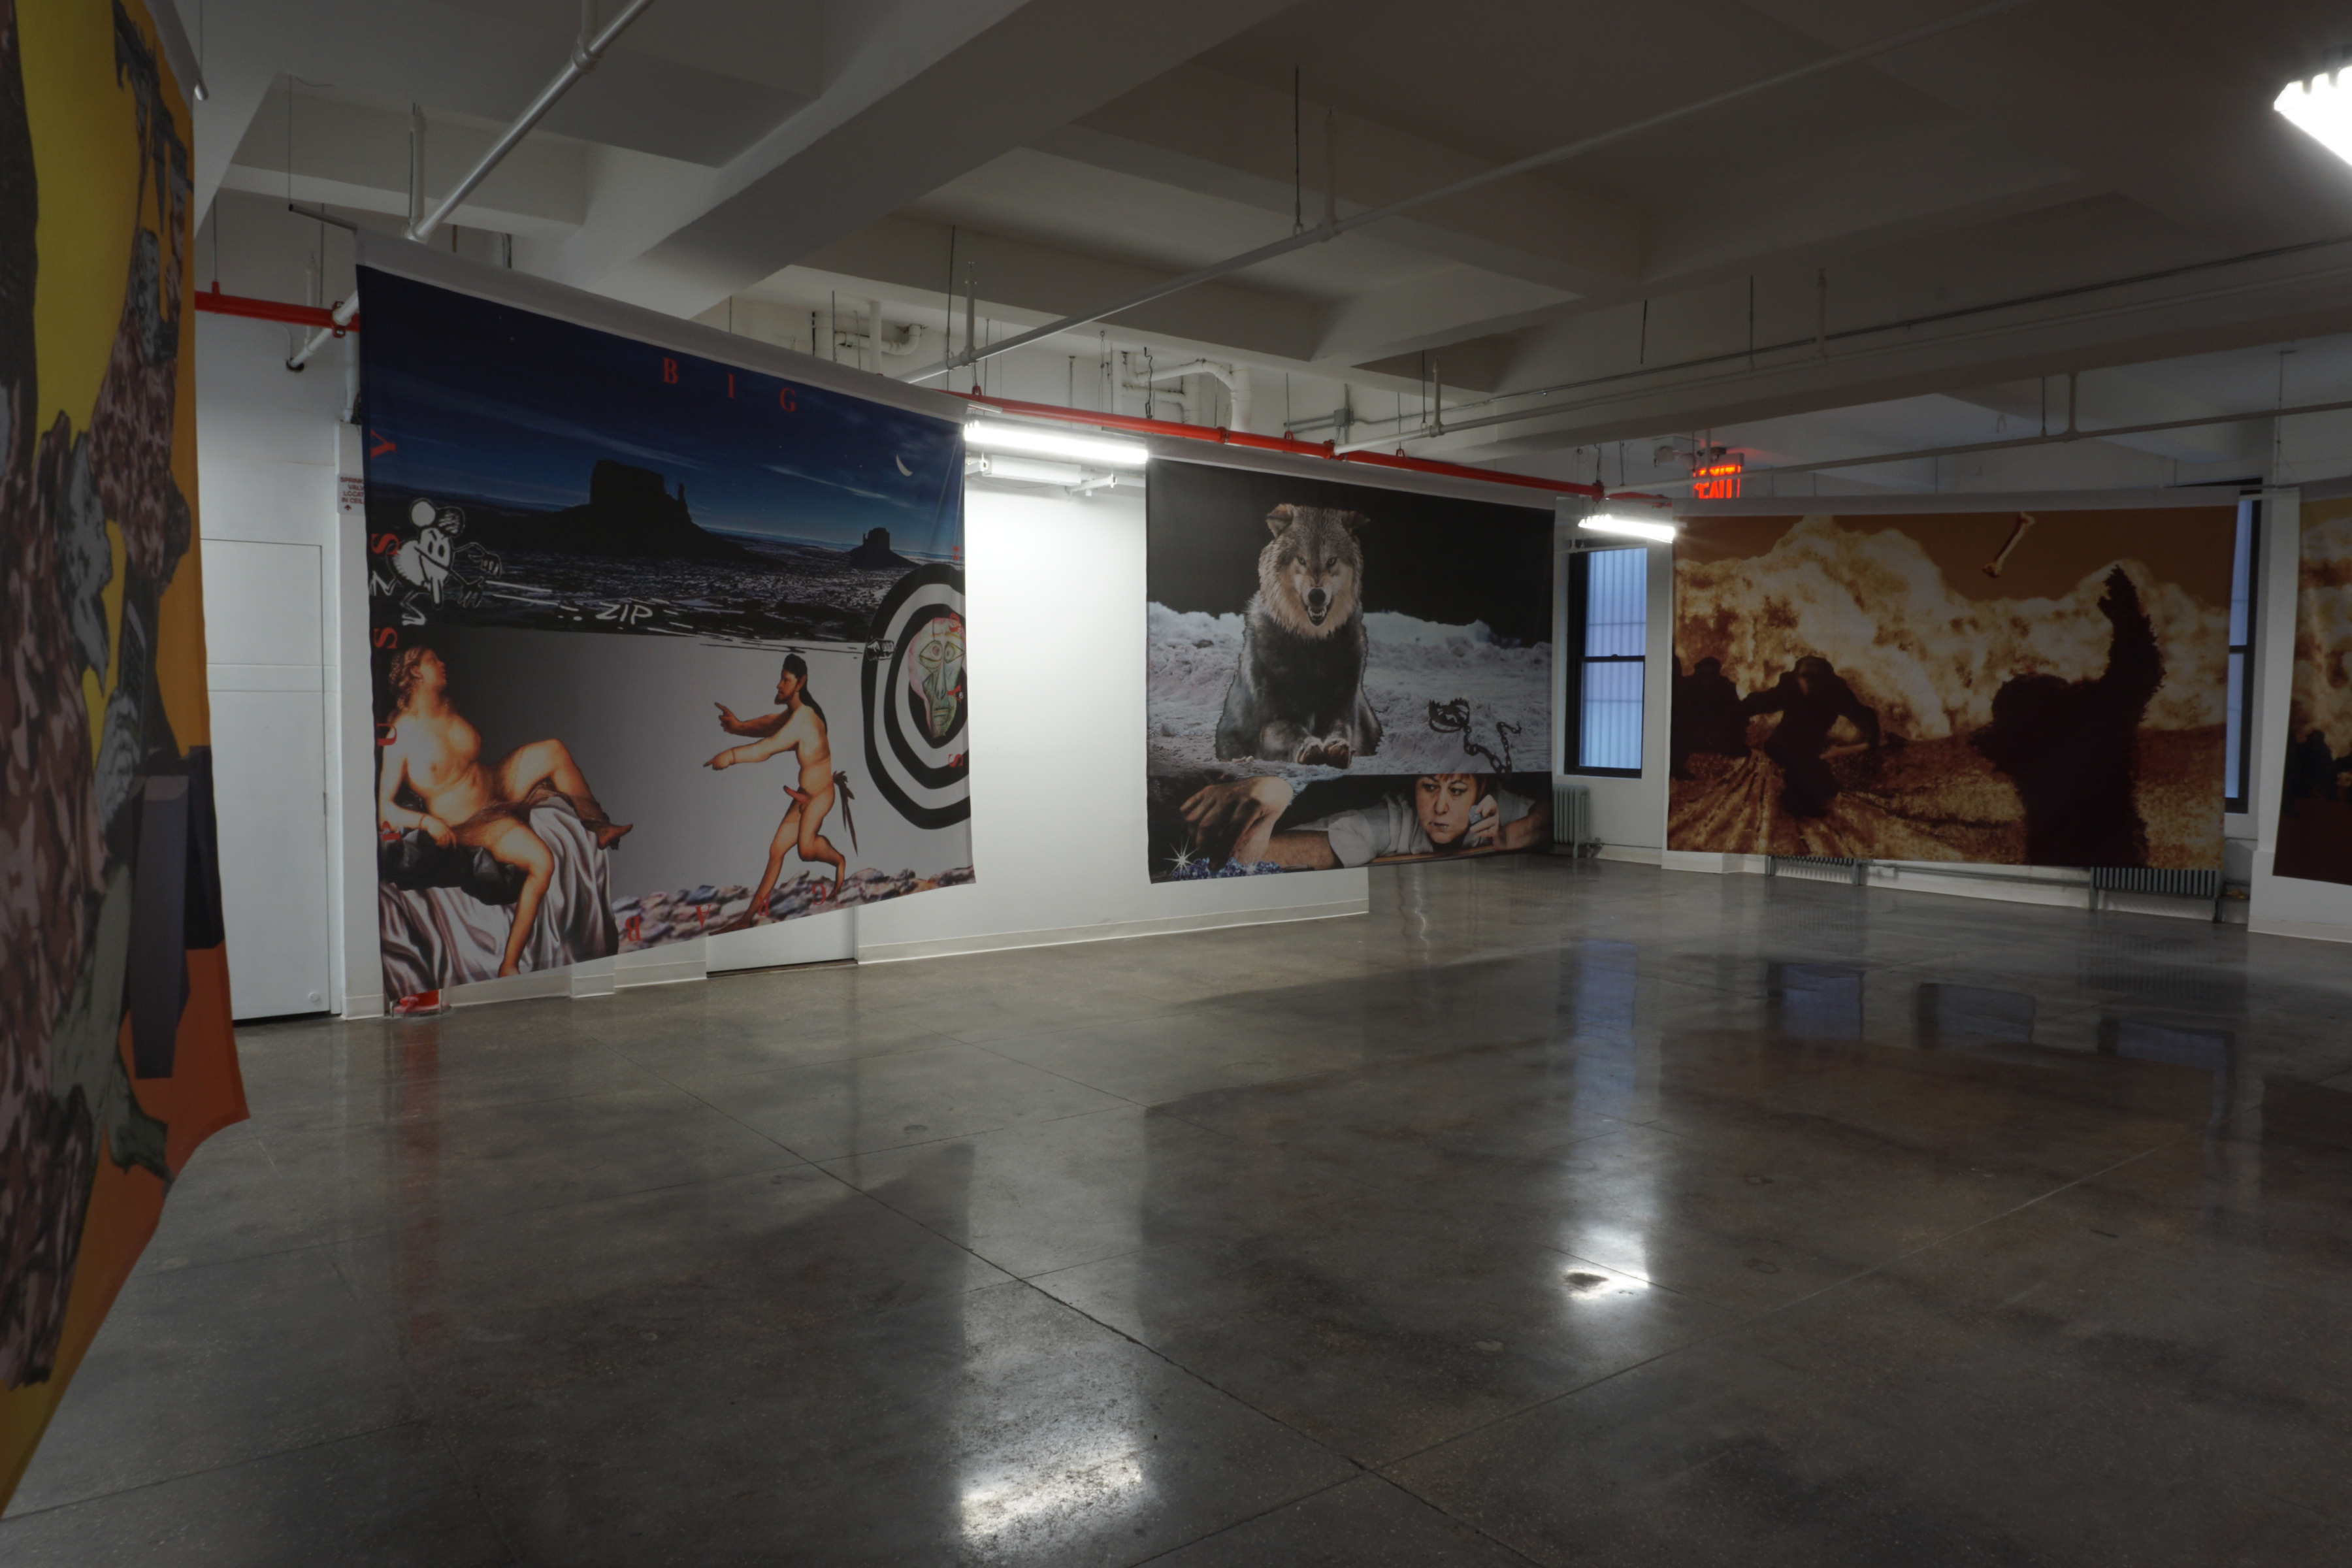 Installation view, Robert Morris: Banners and Curses, 24 WEST 40